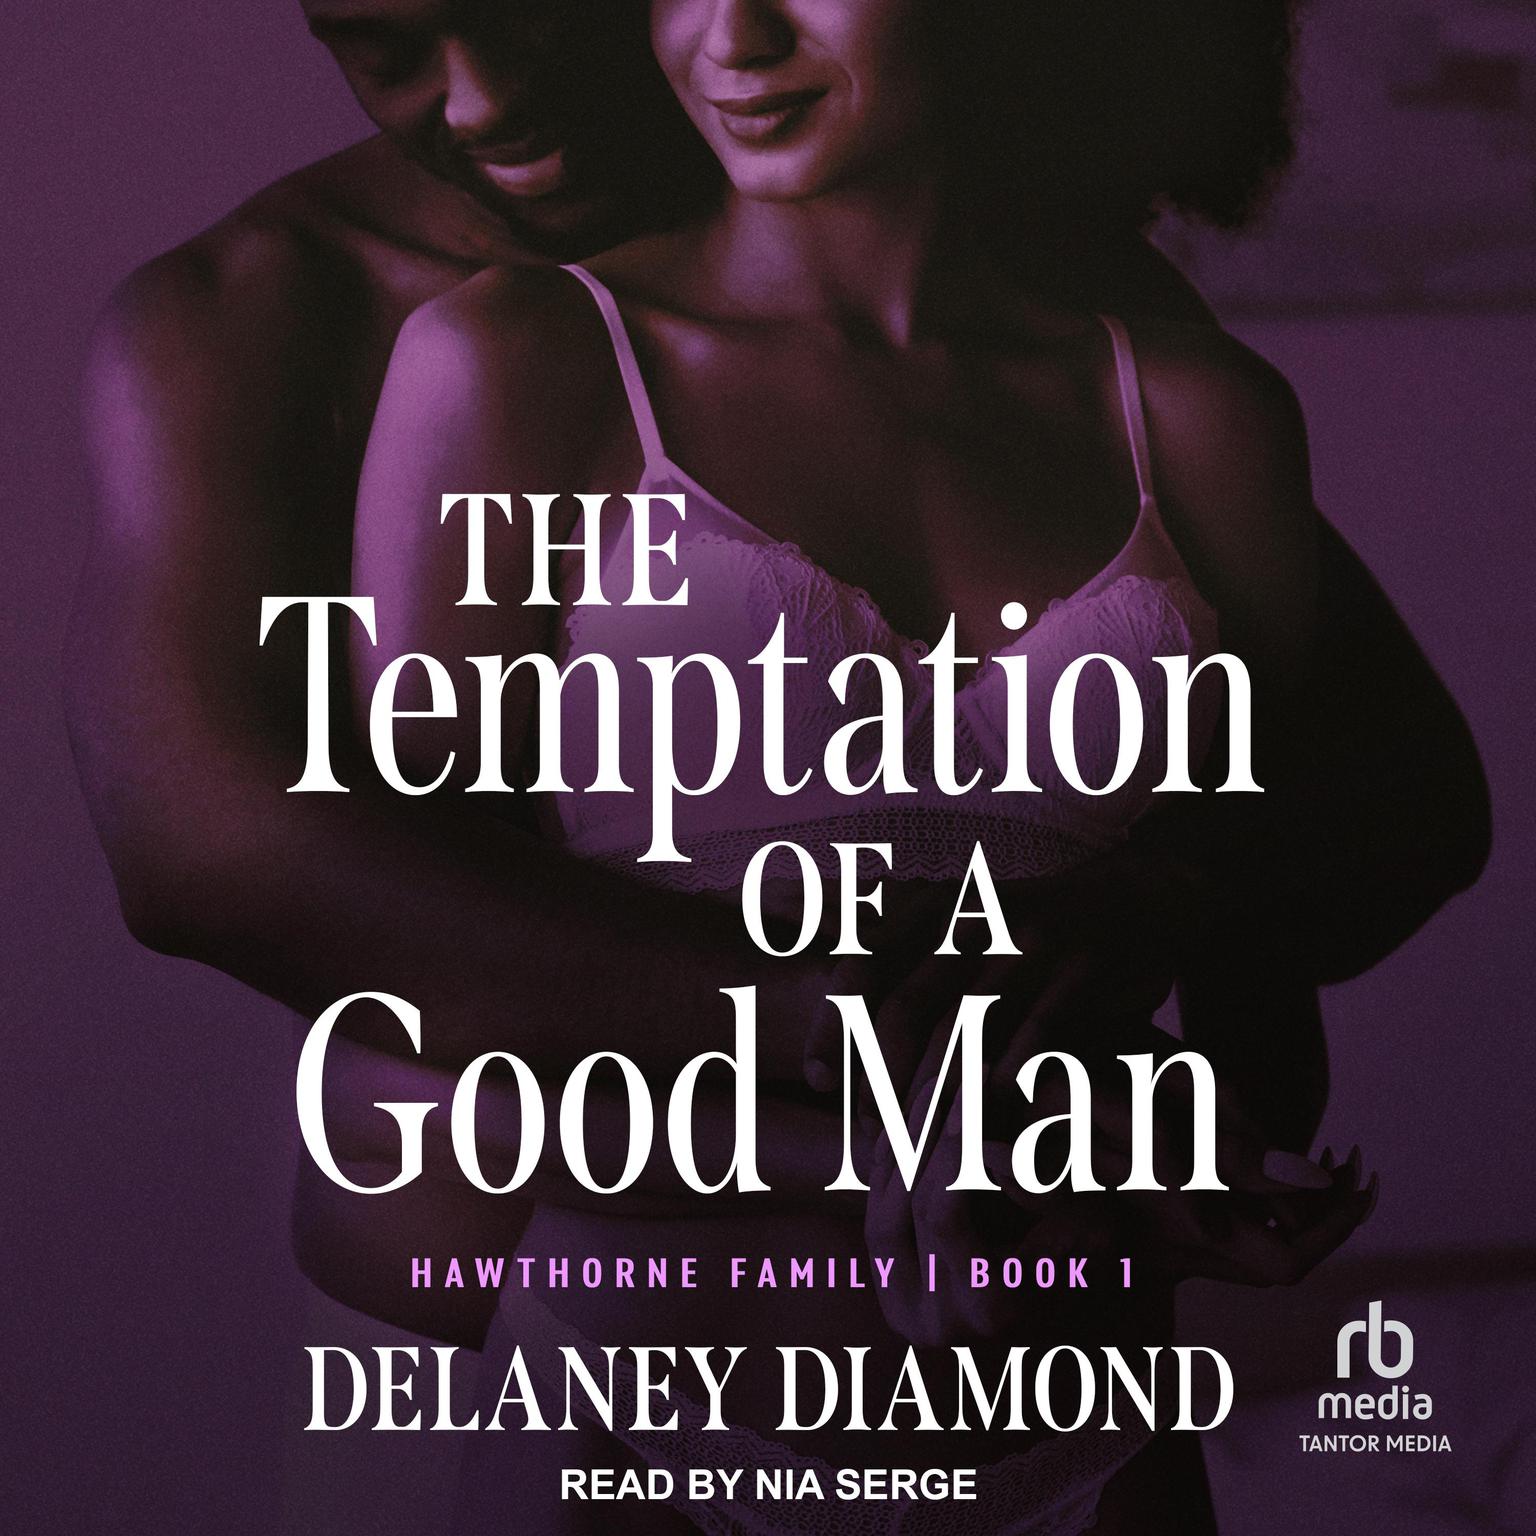 The Temptation of a Good Man Audiobook, by Delaney Diamond